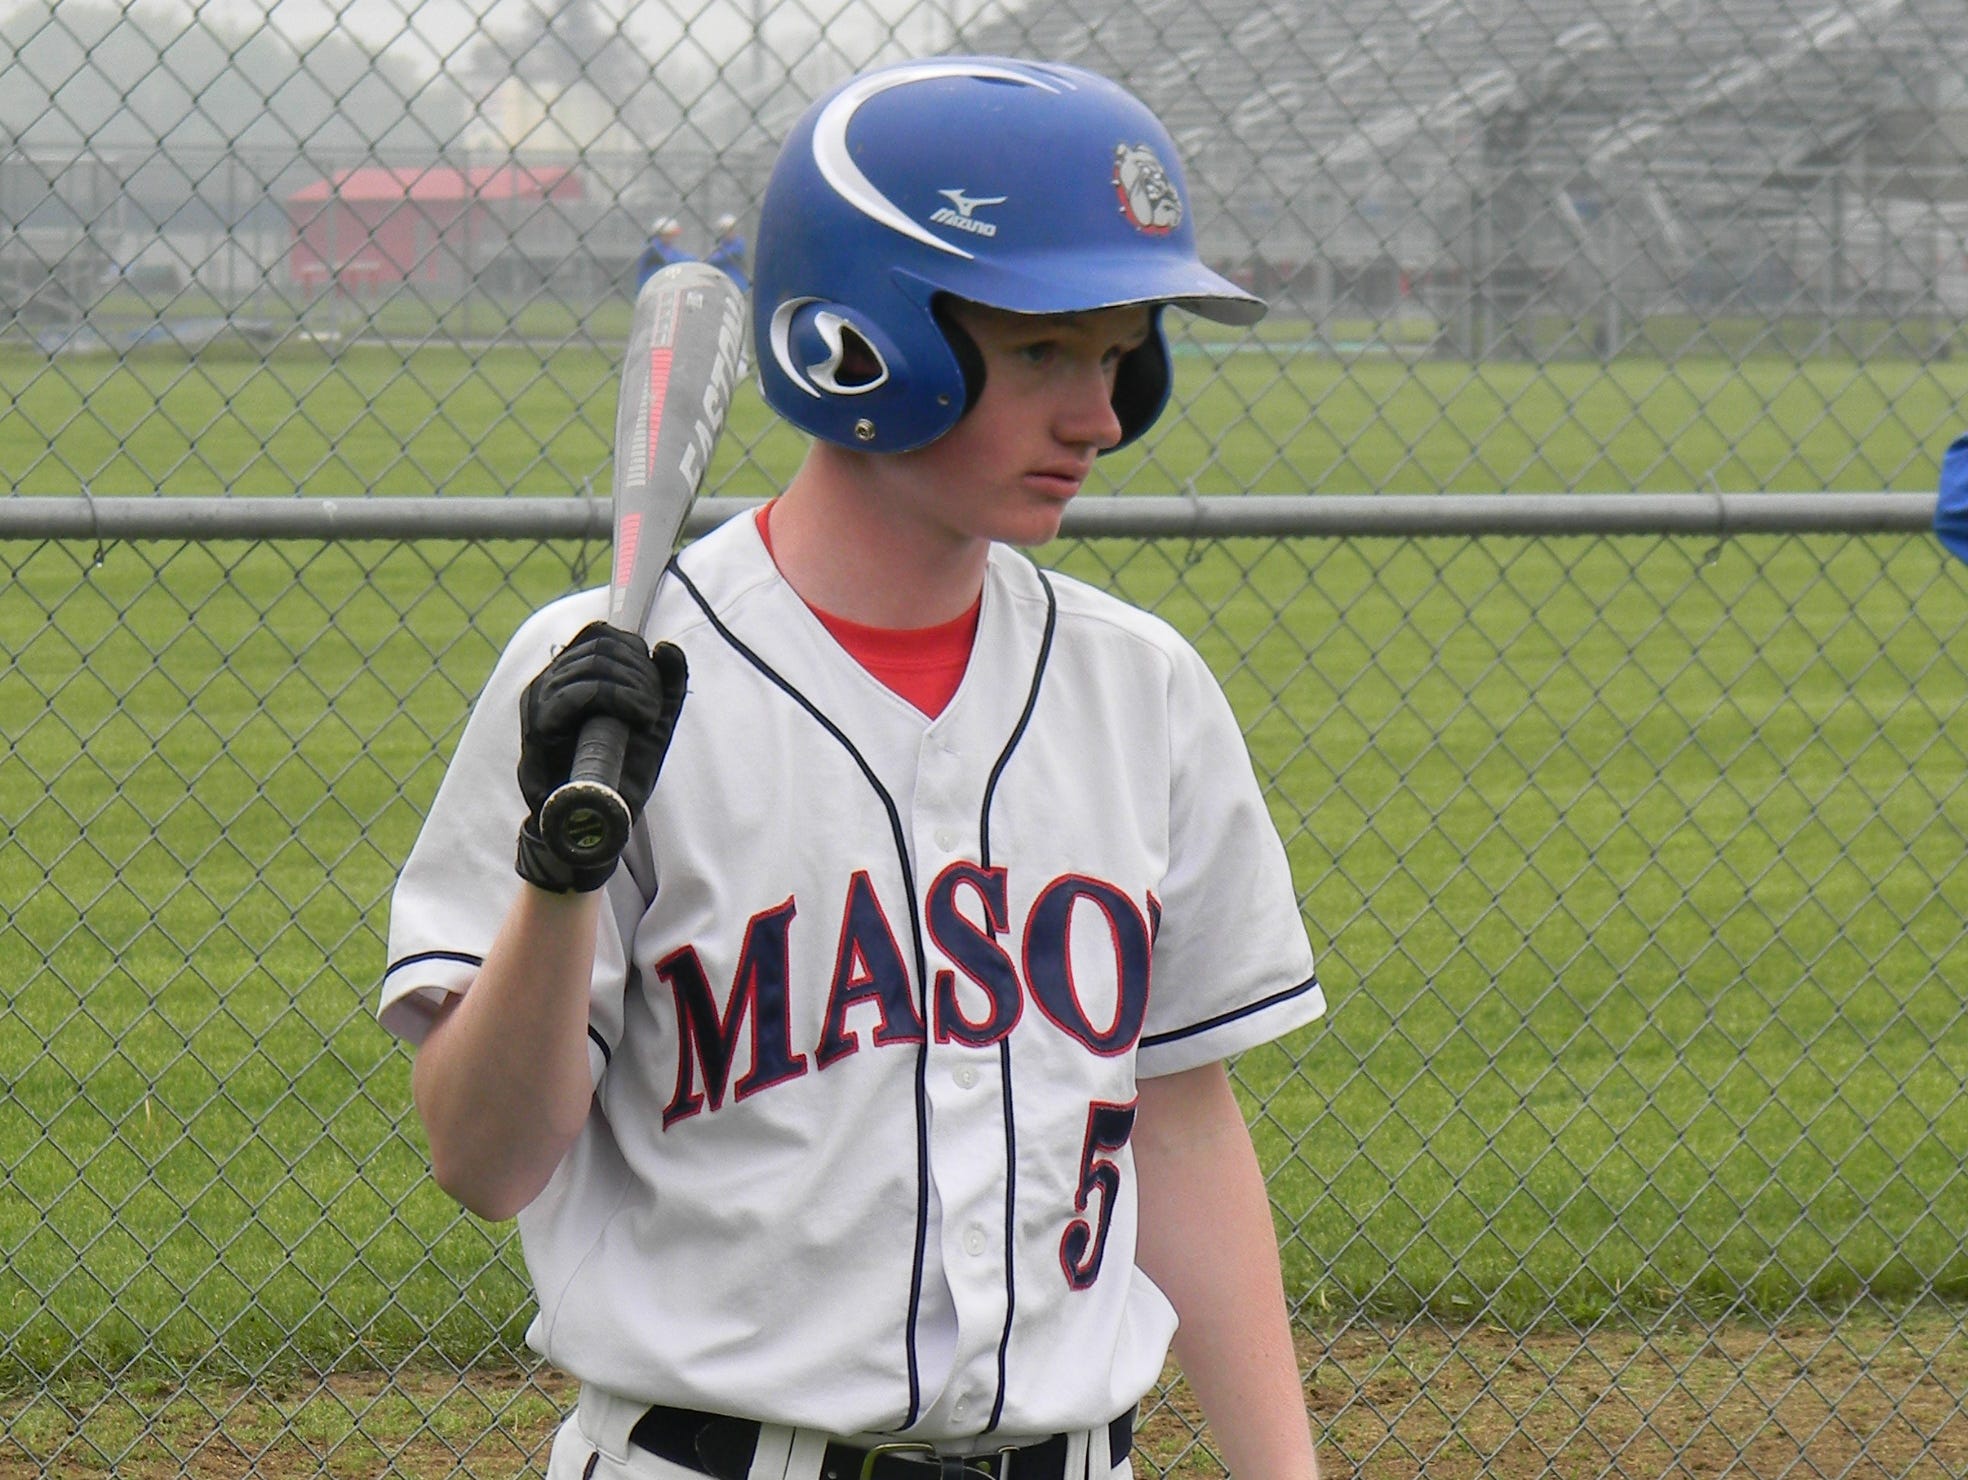 Mason junior Jay Granger, who was recently honored with the Autism Alliance of Michigan's Courage Award, is living out his dream as a varsity baseball player for the Bulldogs.